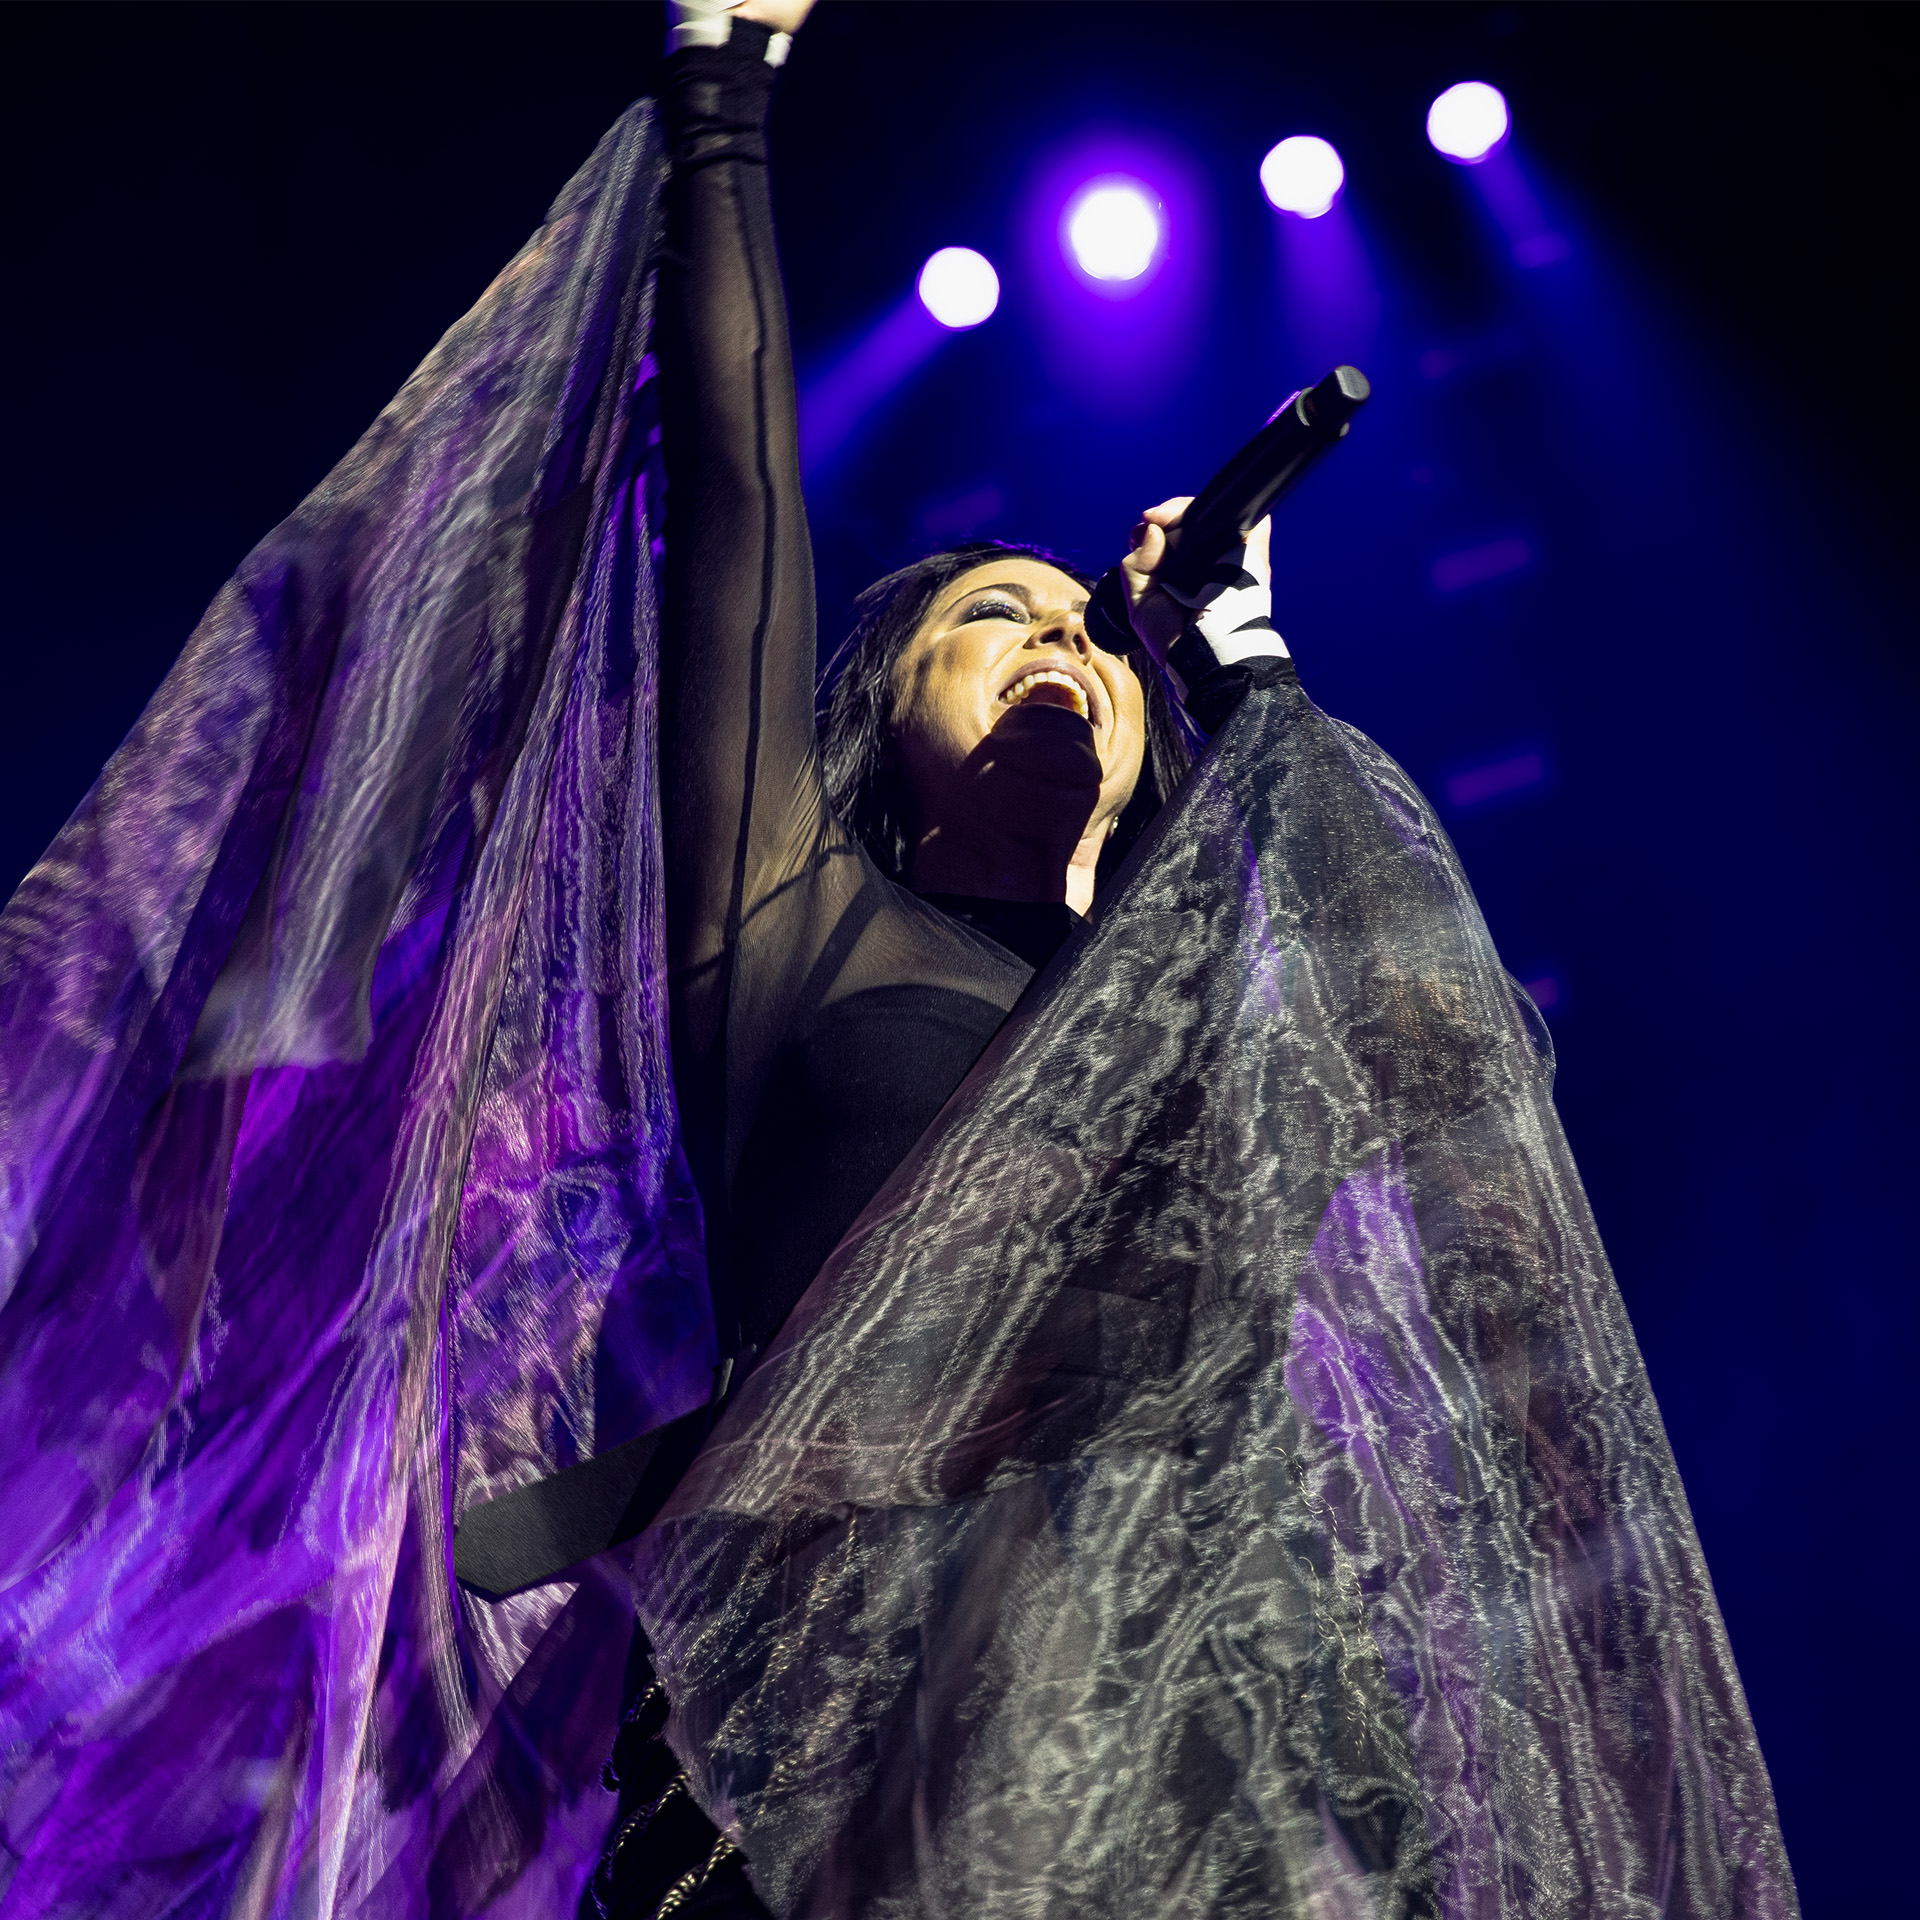 GIG REVIEW: Evanescence Proves Goth Rock is Alive and Thriving In Australia